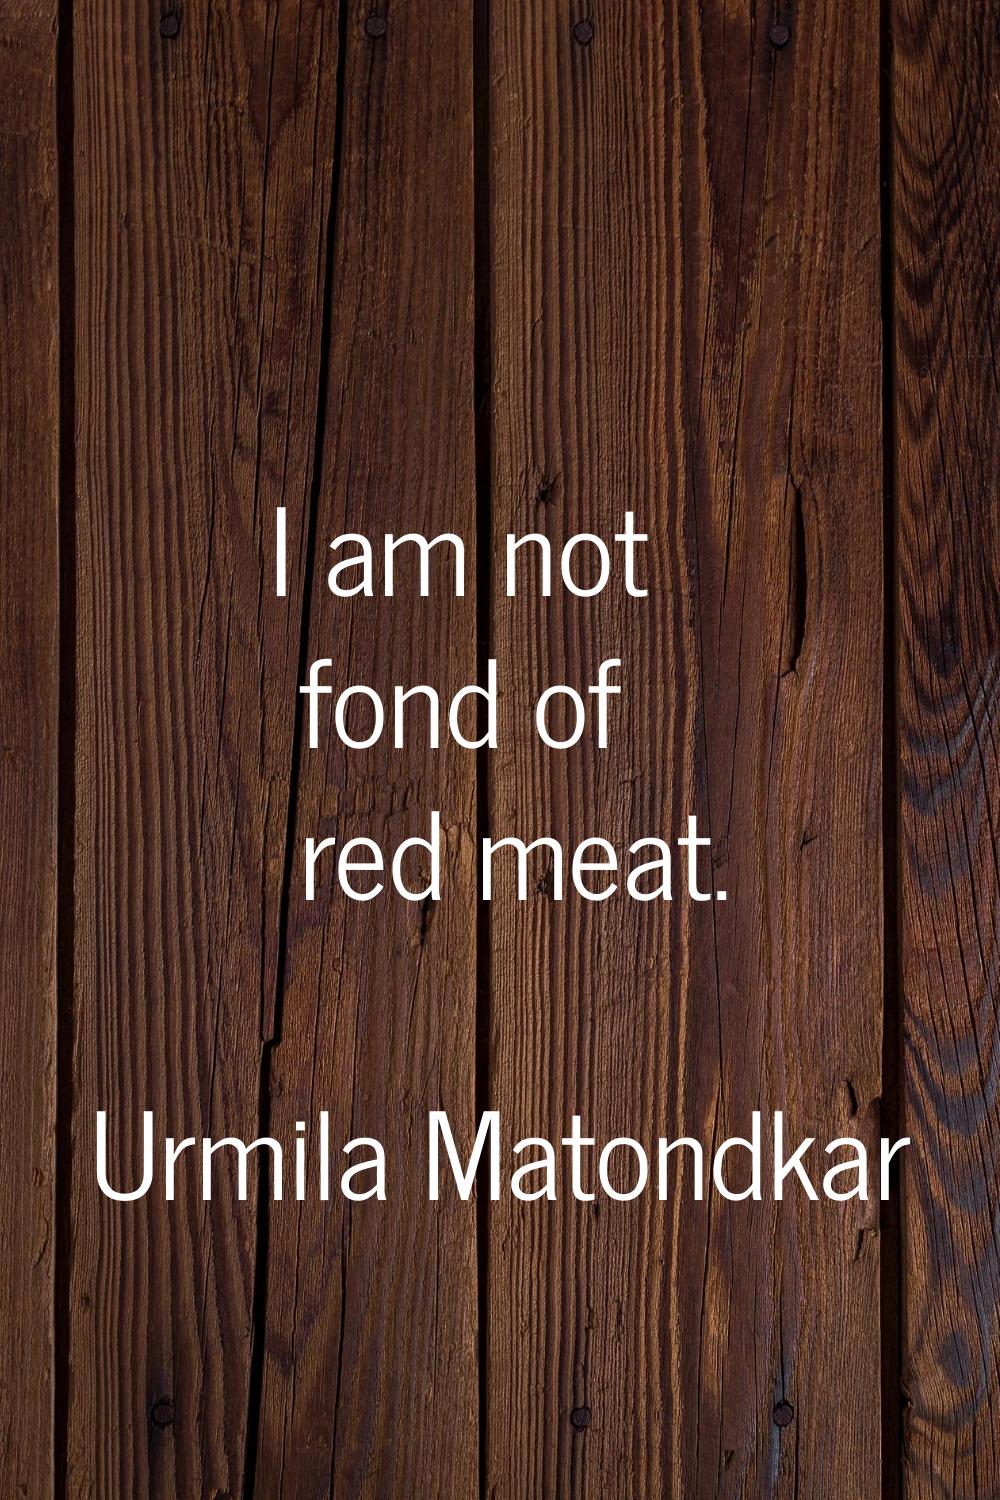 I am not fond of red meat.